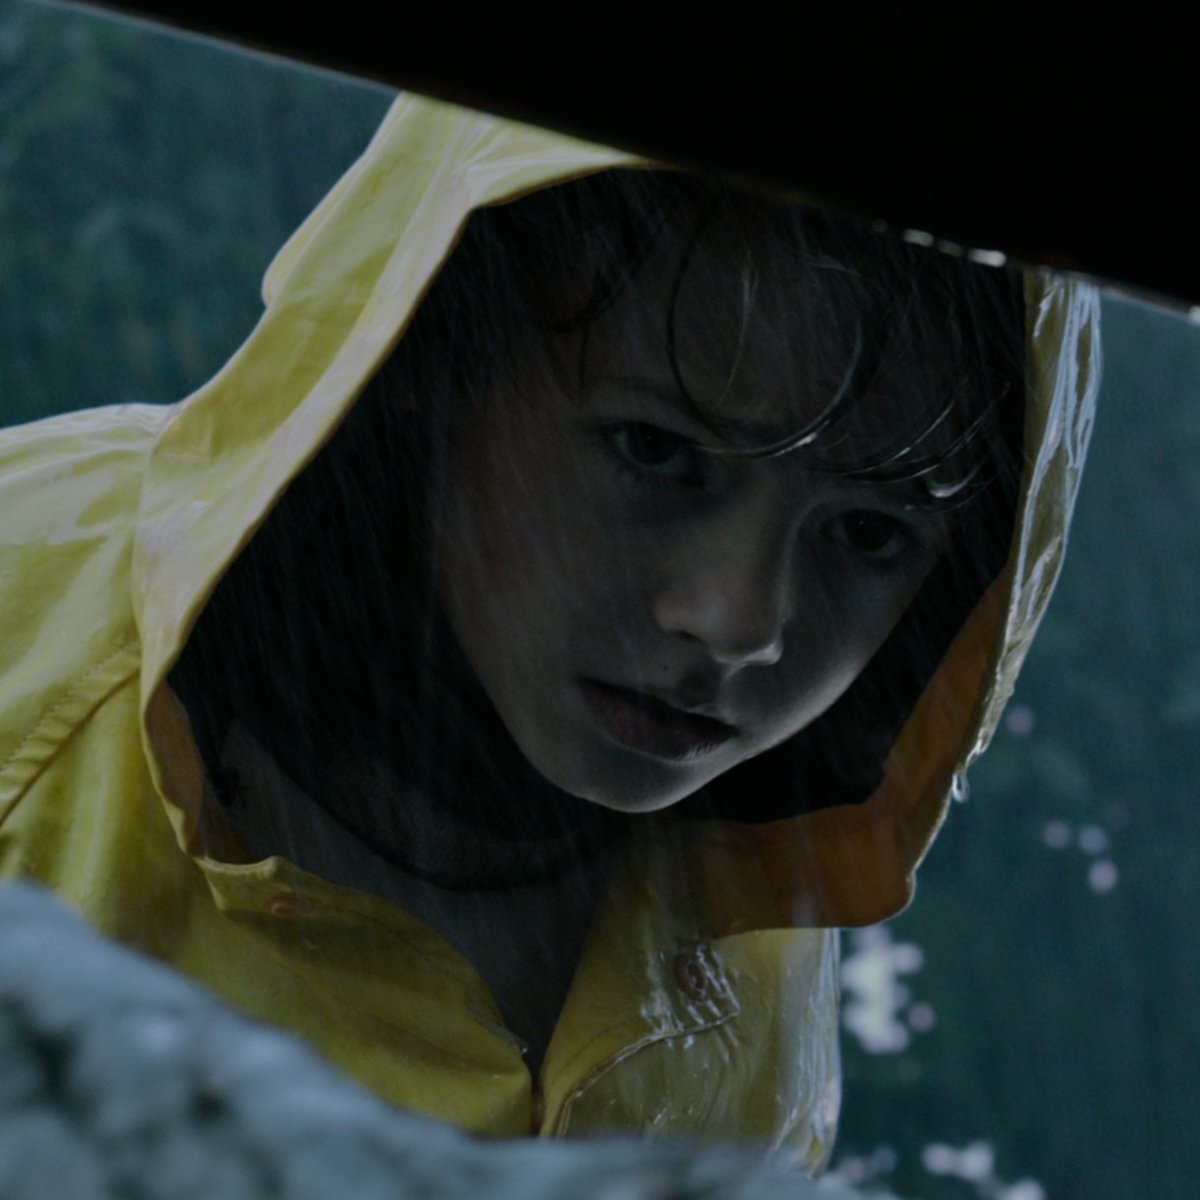 RT @RottenTomatoes: You'll float too.. #ITMovie https://t.co/MImT3w1eBk